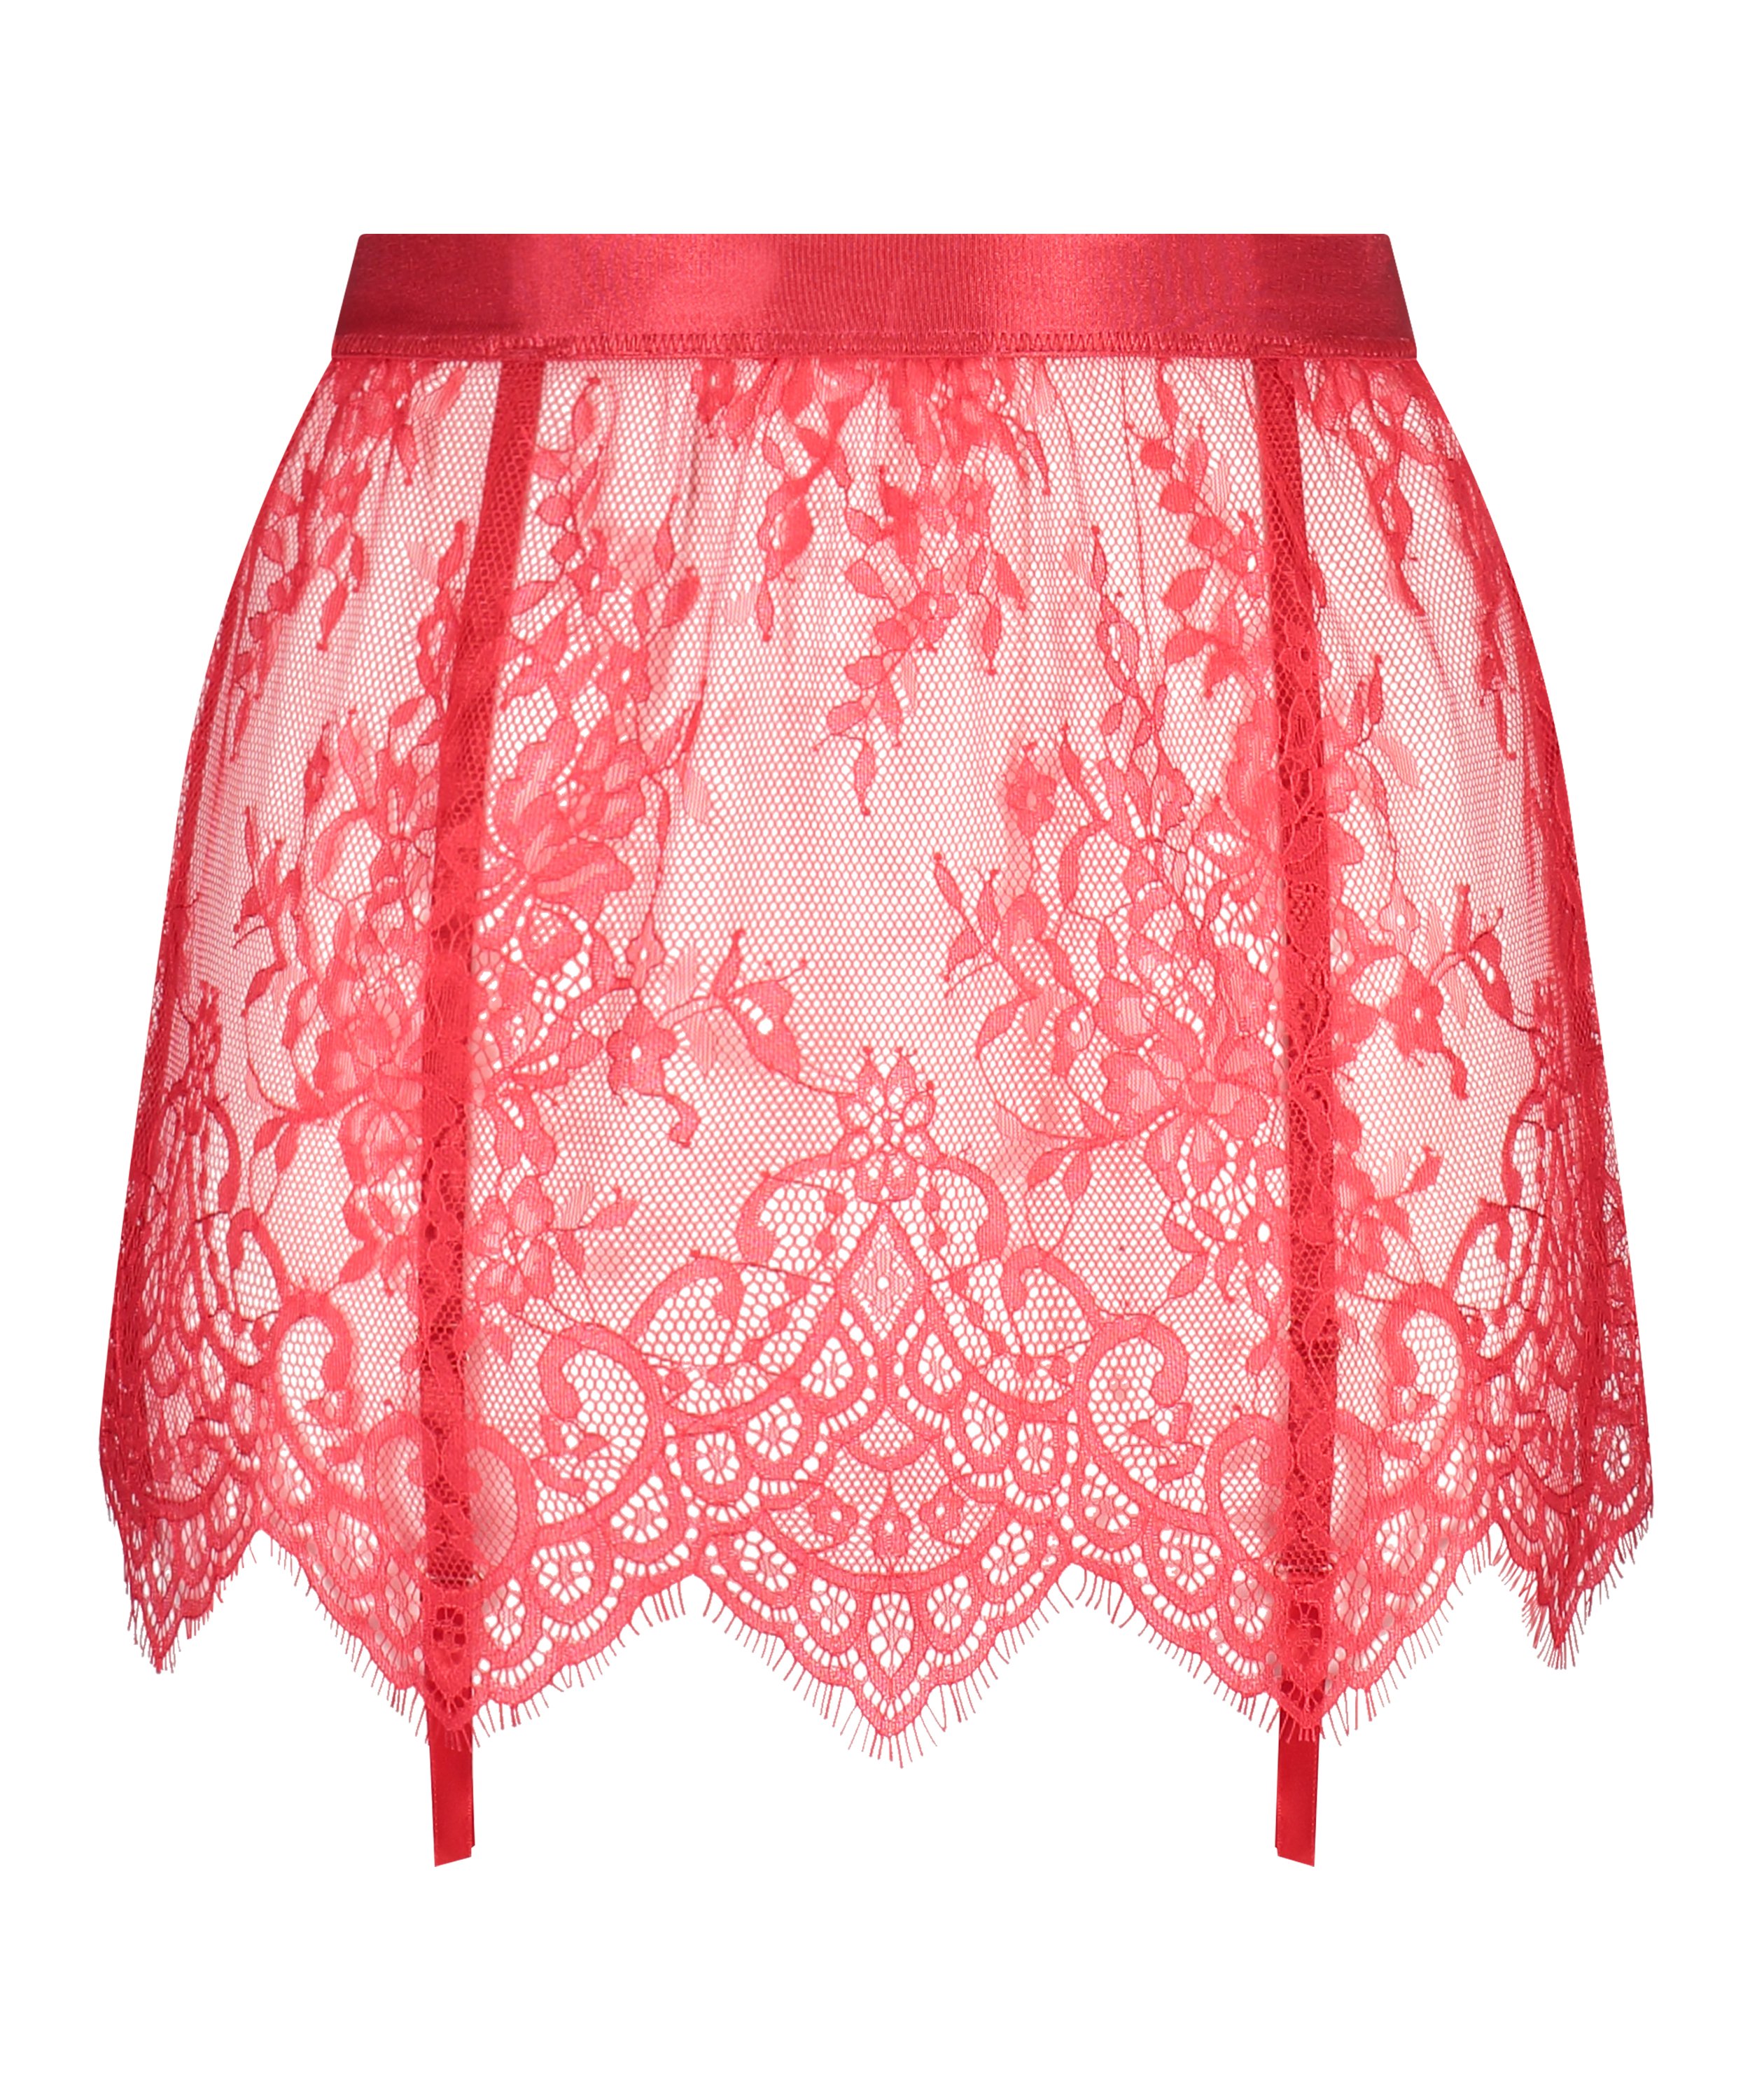 Lace Skirt, Red, main